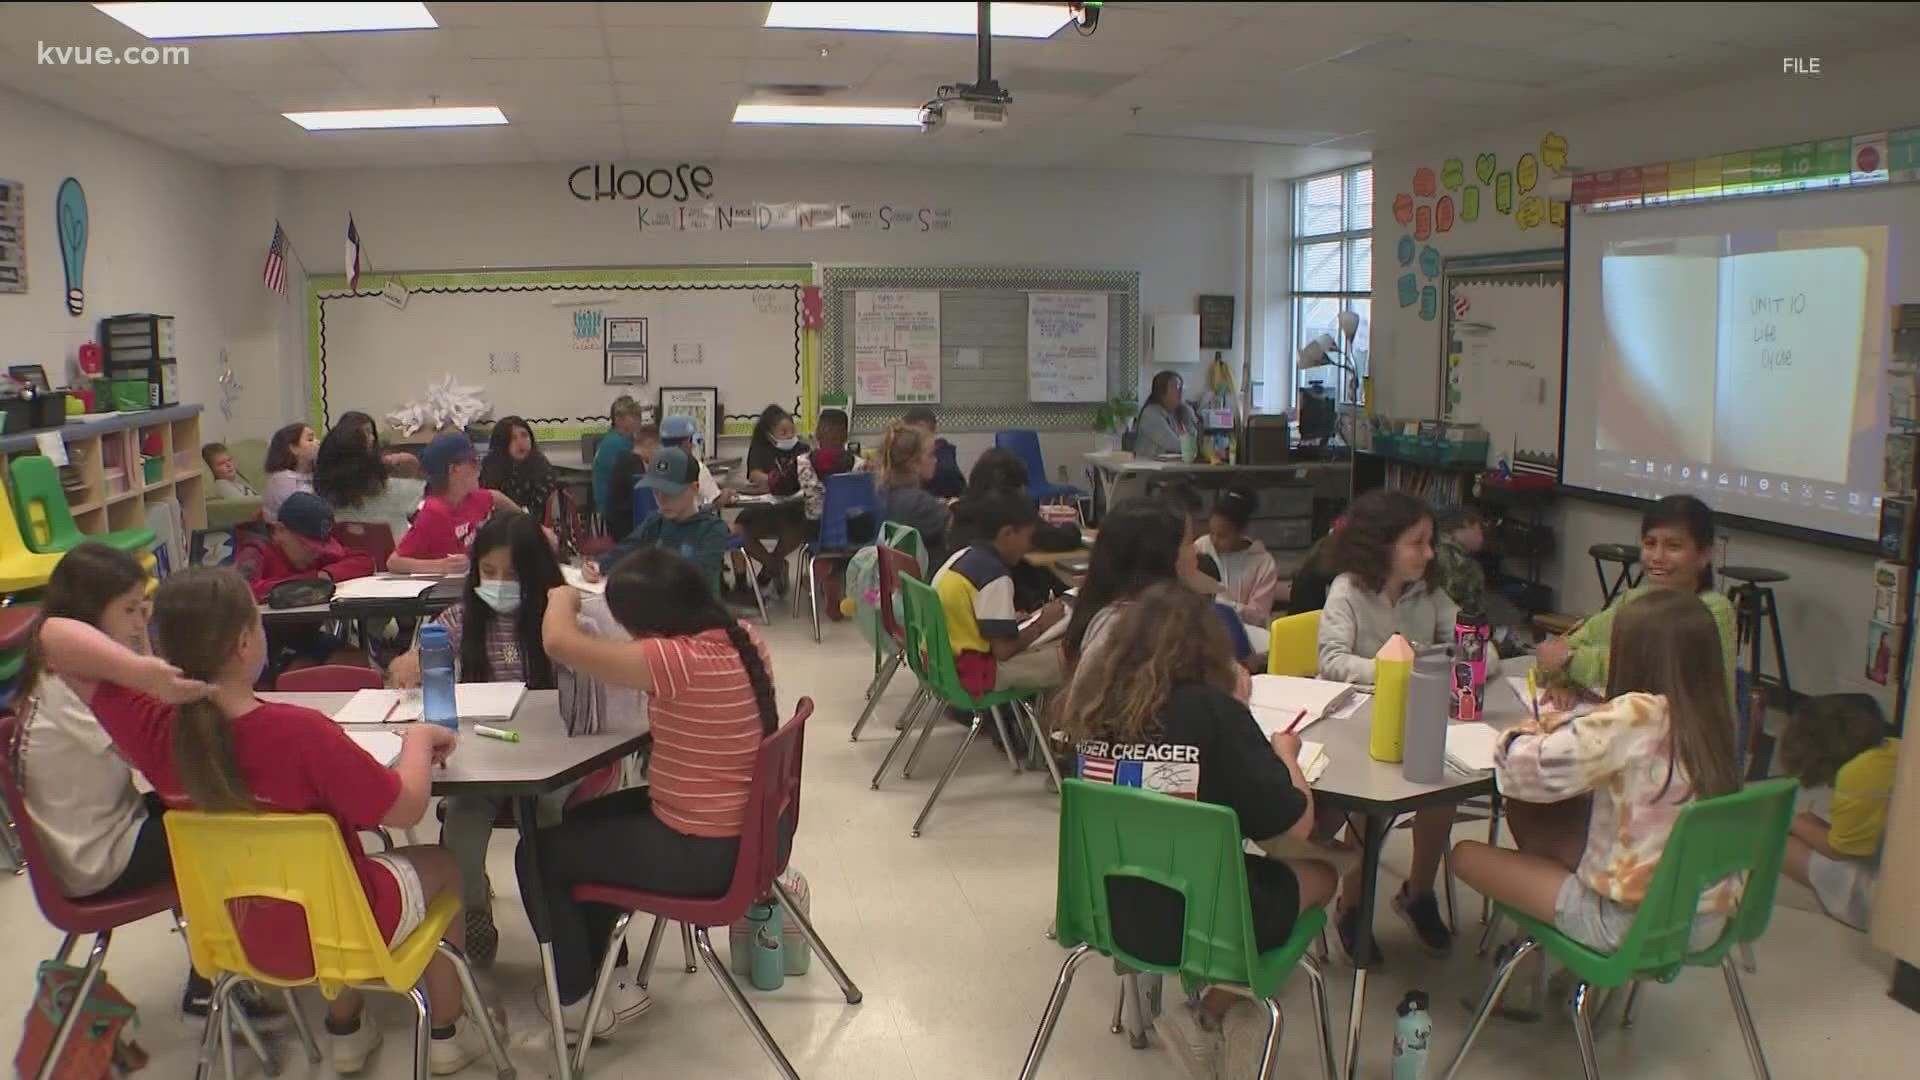 KVUE's Maria Aguilera spoke to a teacher on the task force about what they hope to accomplish.